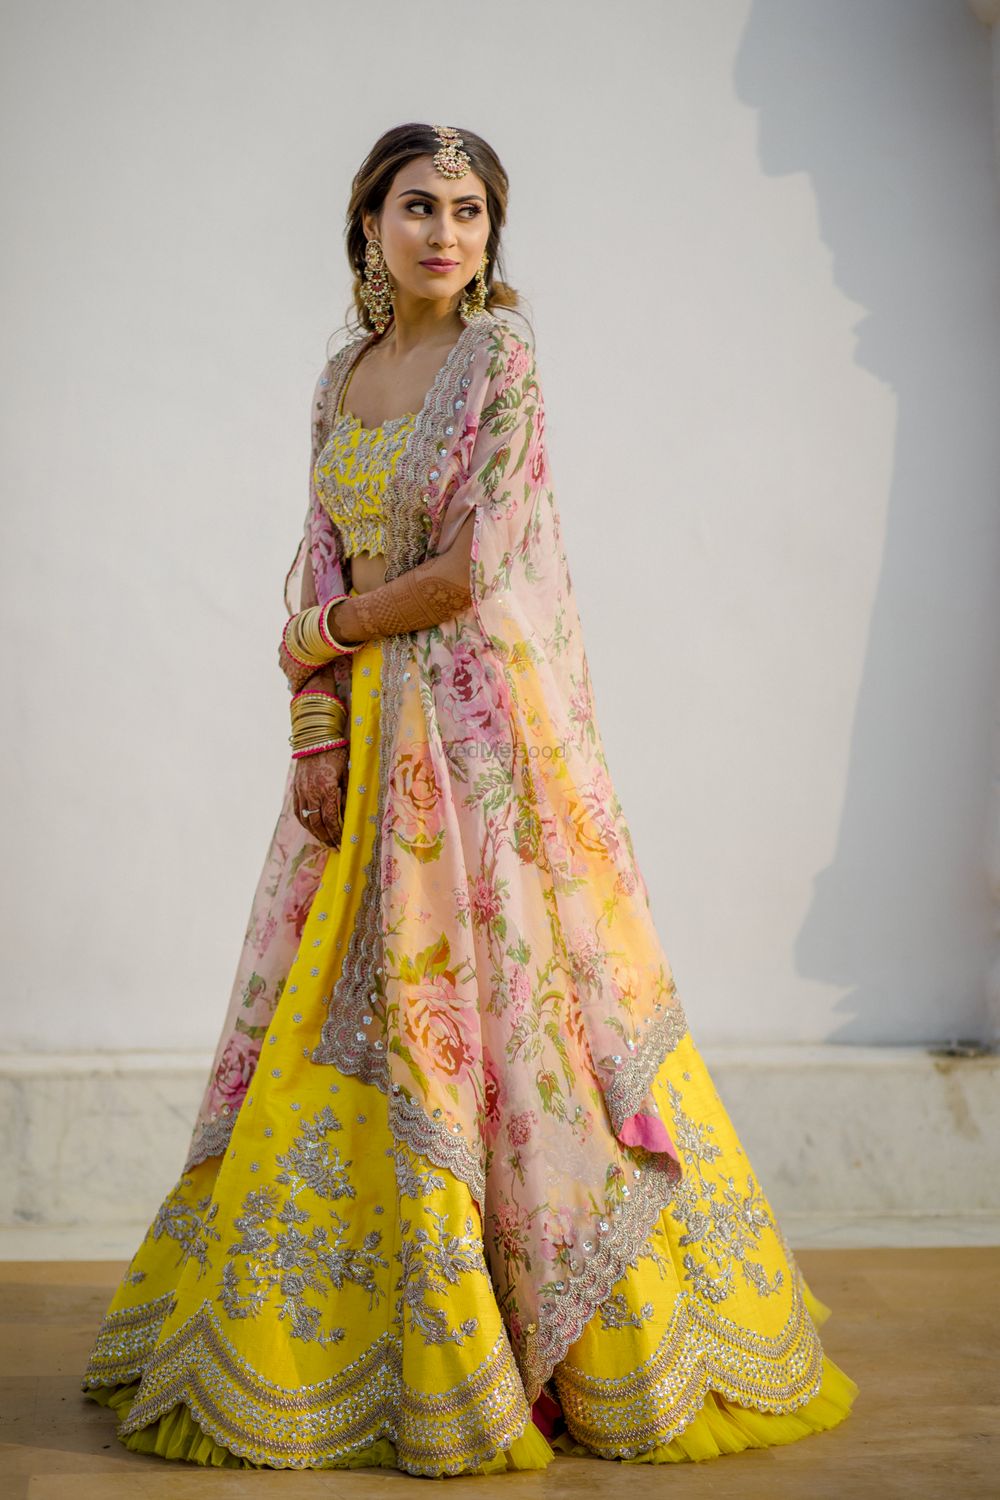 Photo of Bride wearing a yellow lehenga with a floral print dupatta